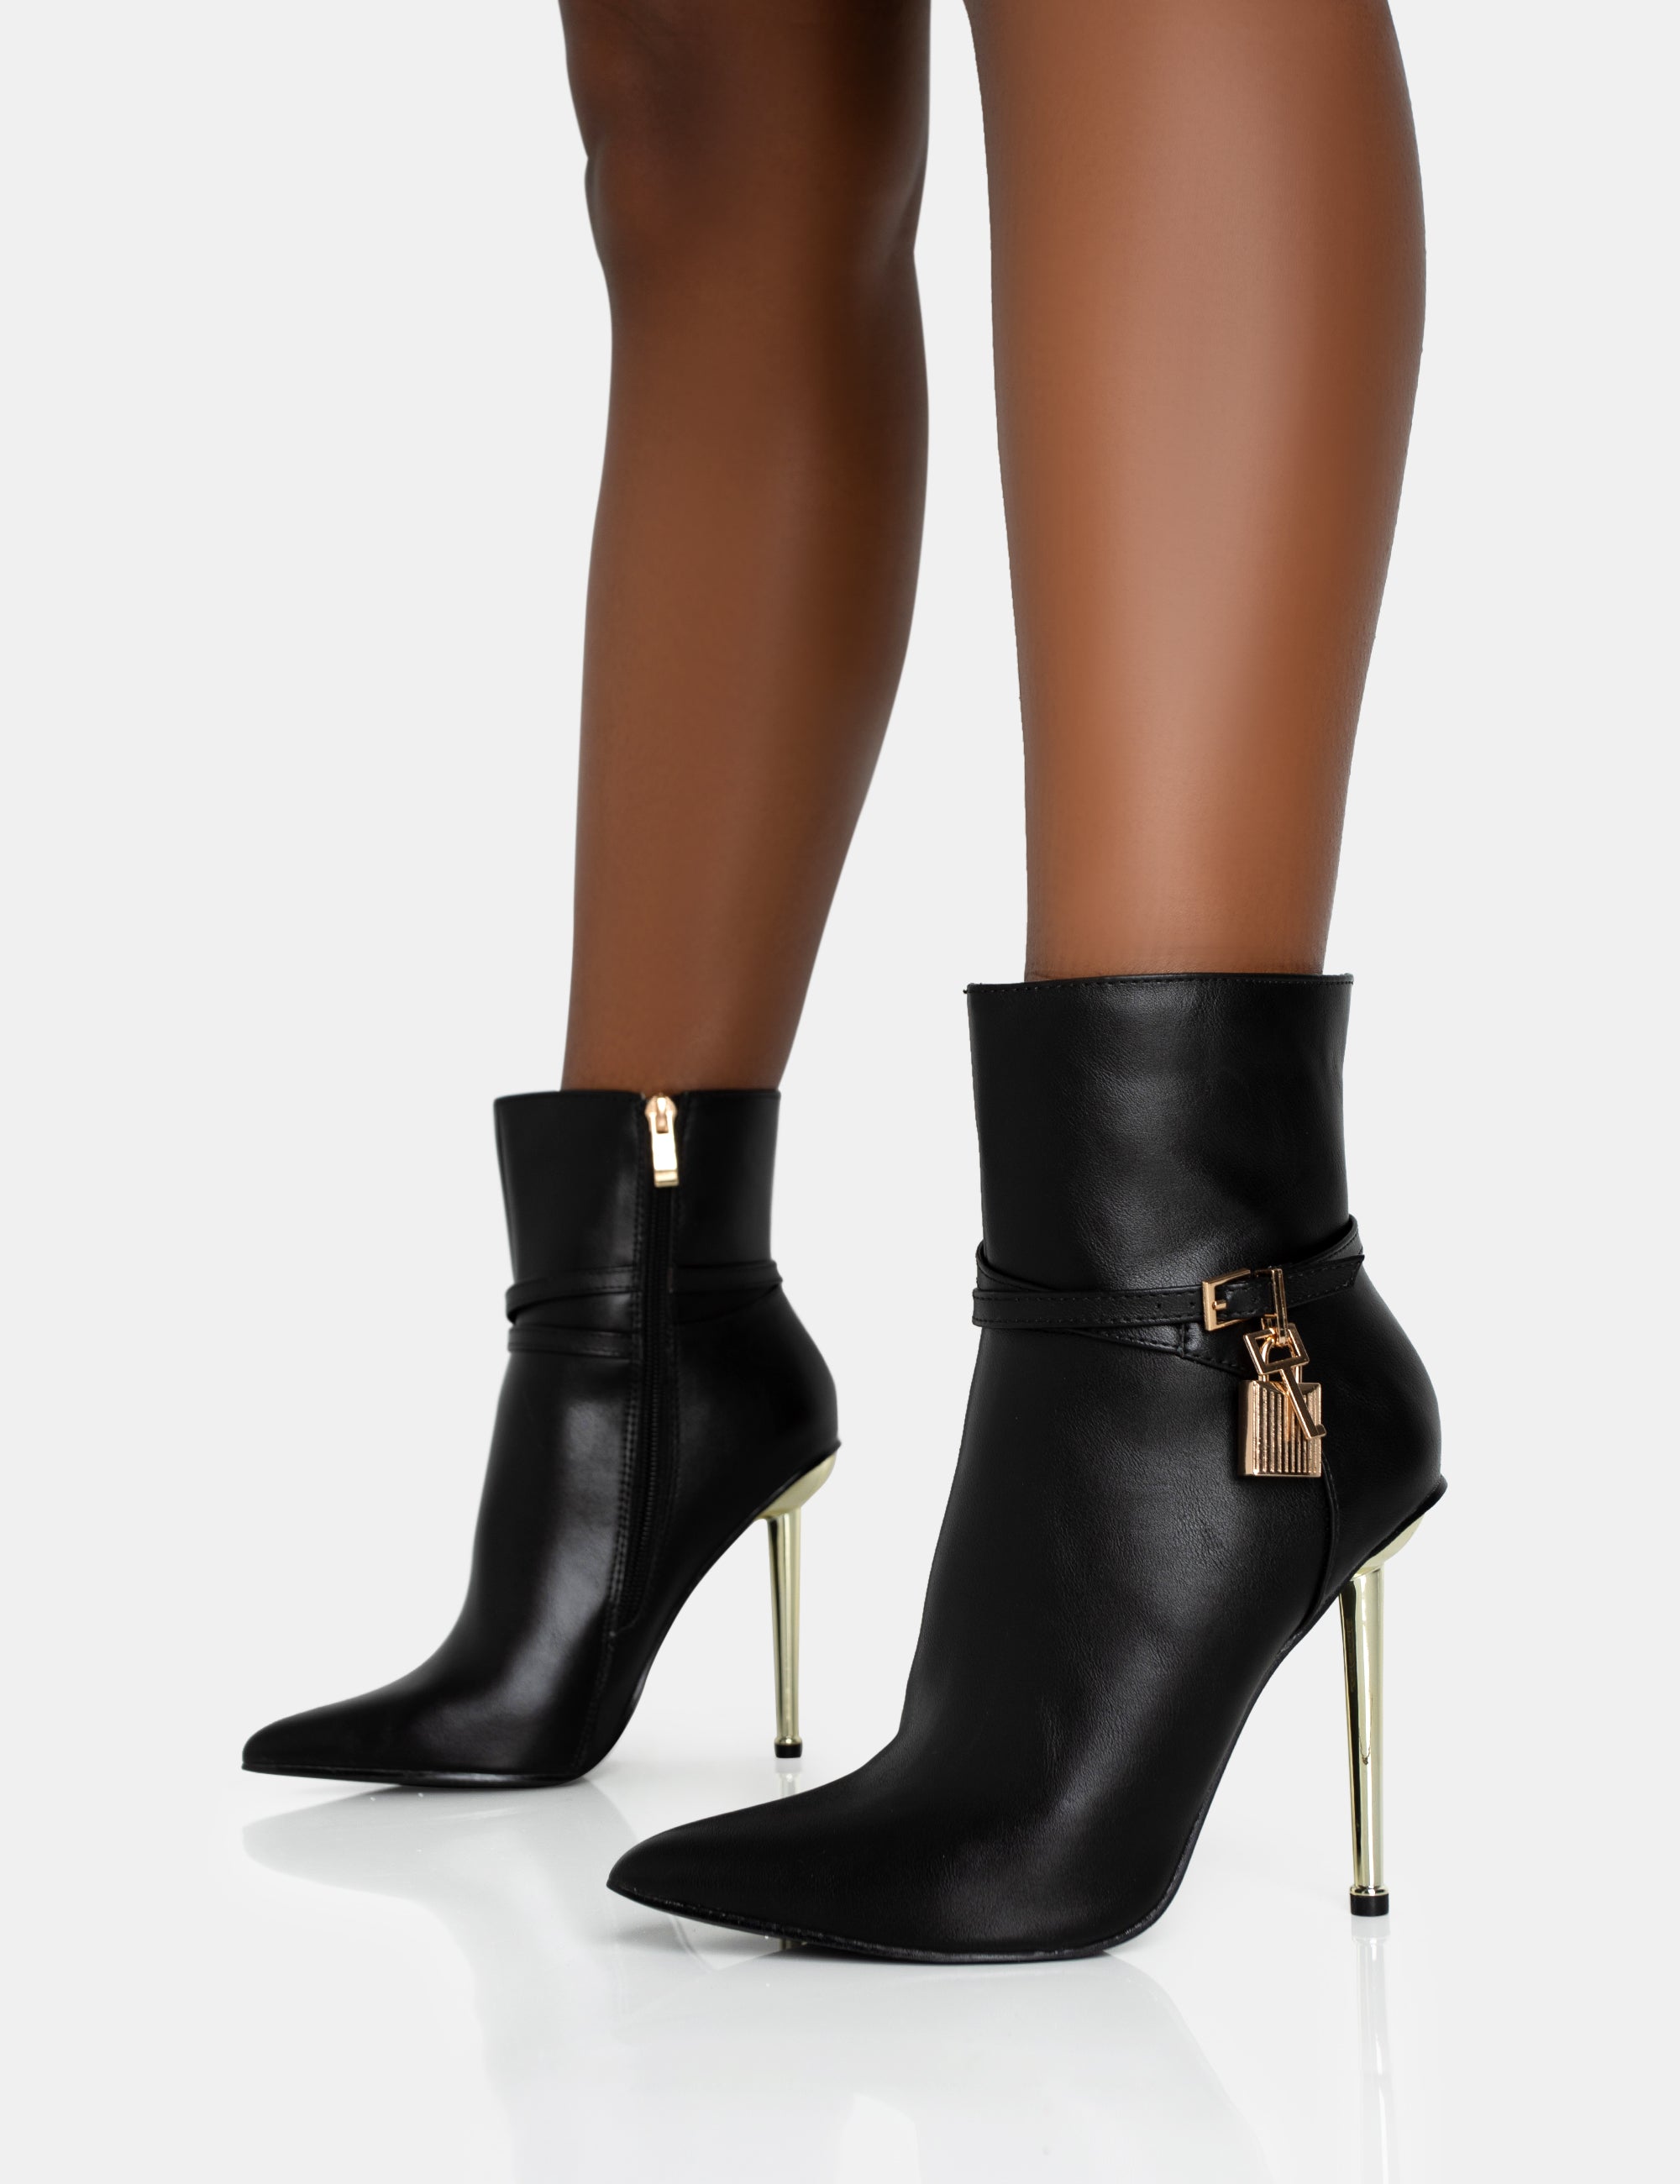 Stiletto Heel Pointed Toe Ankle Boots